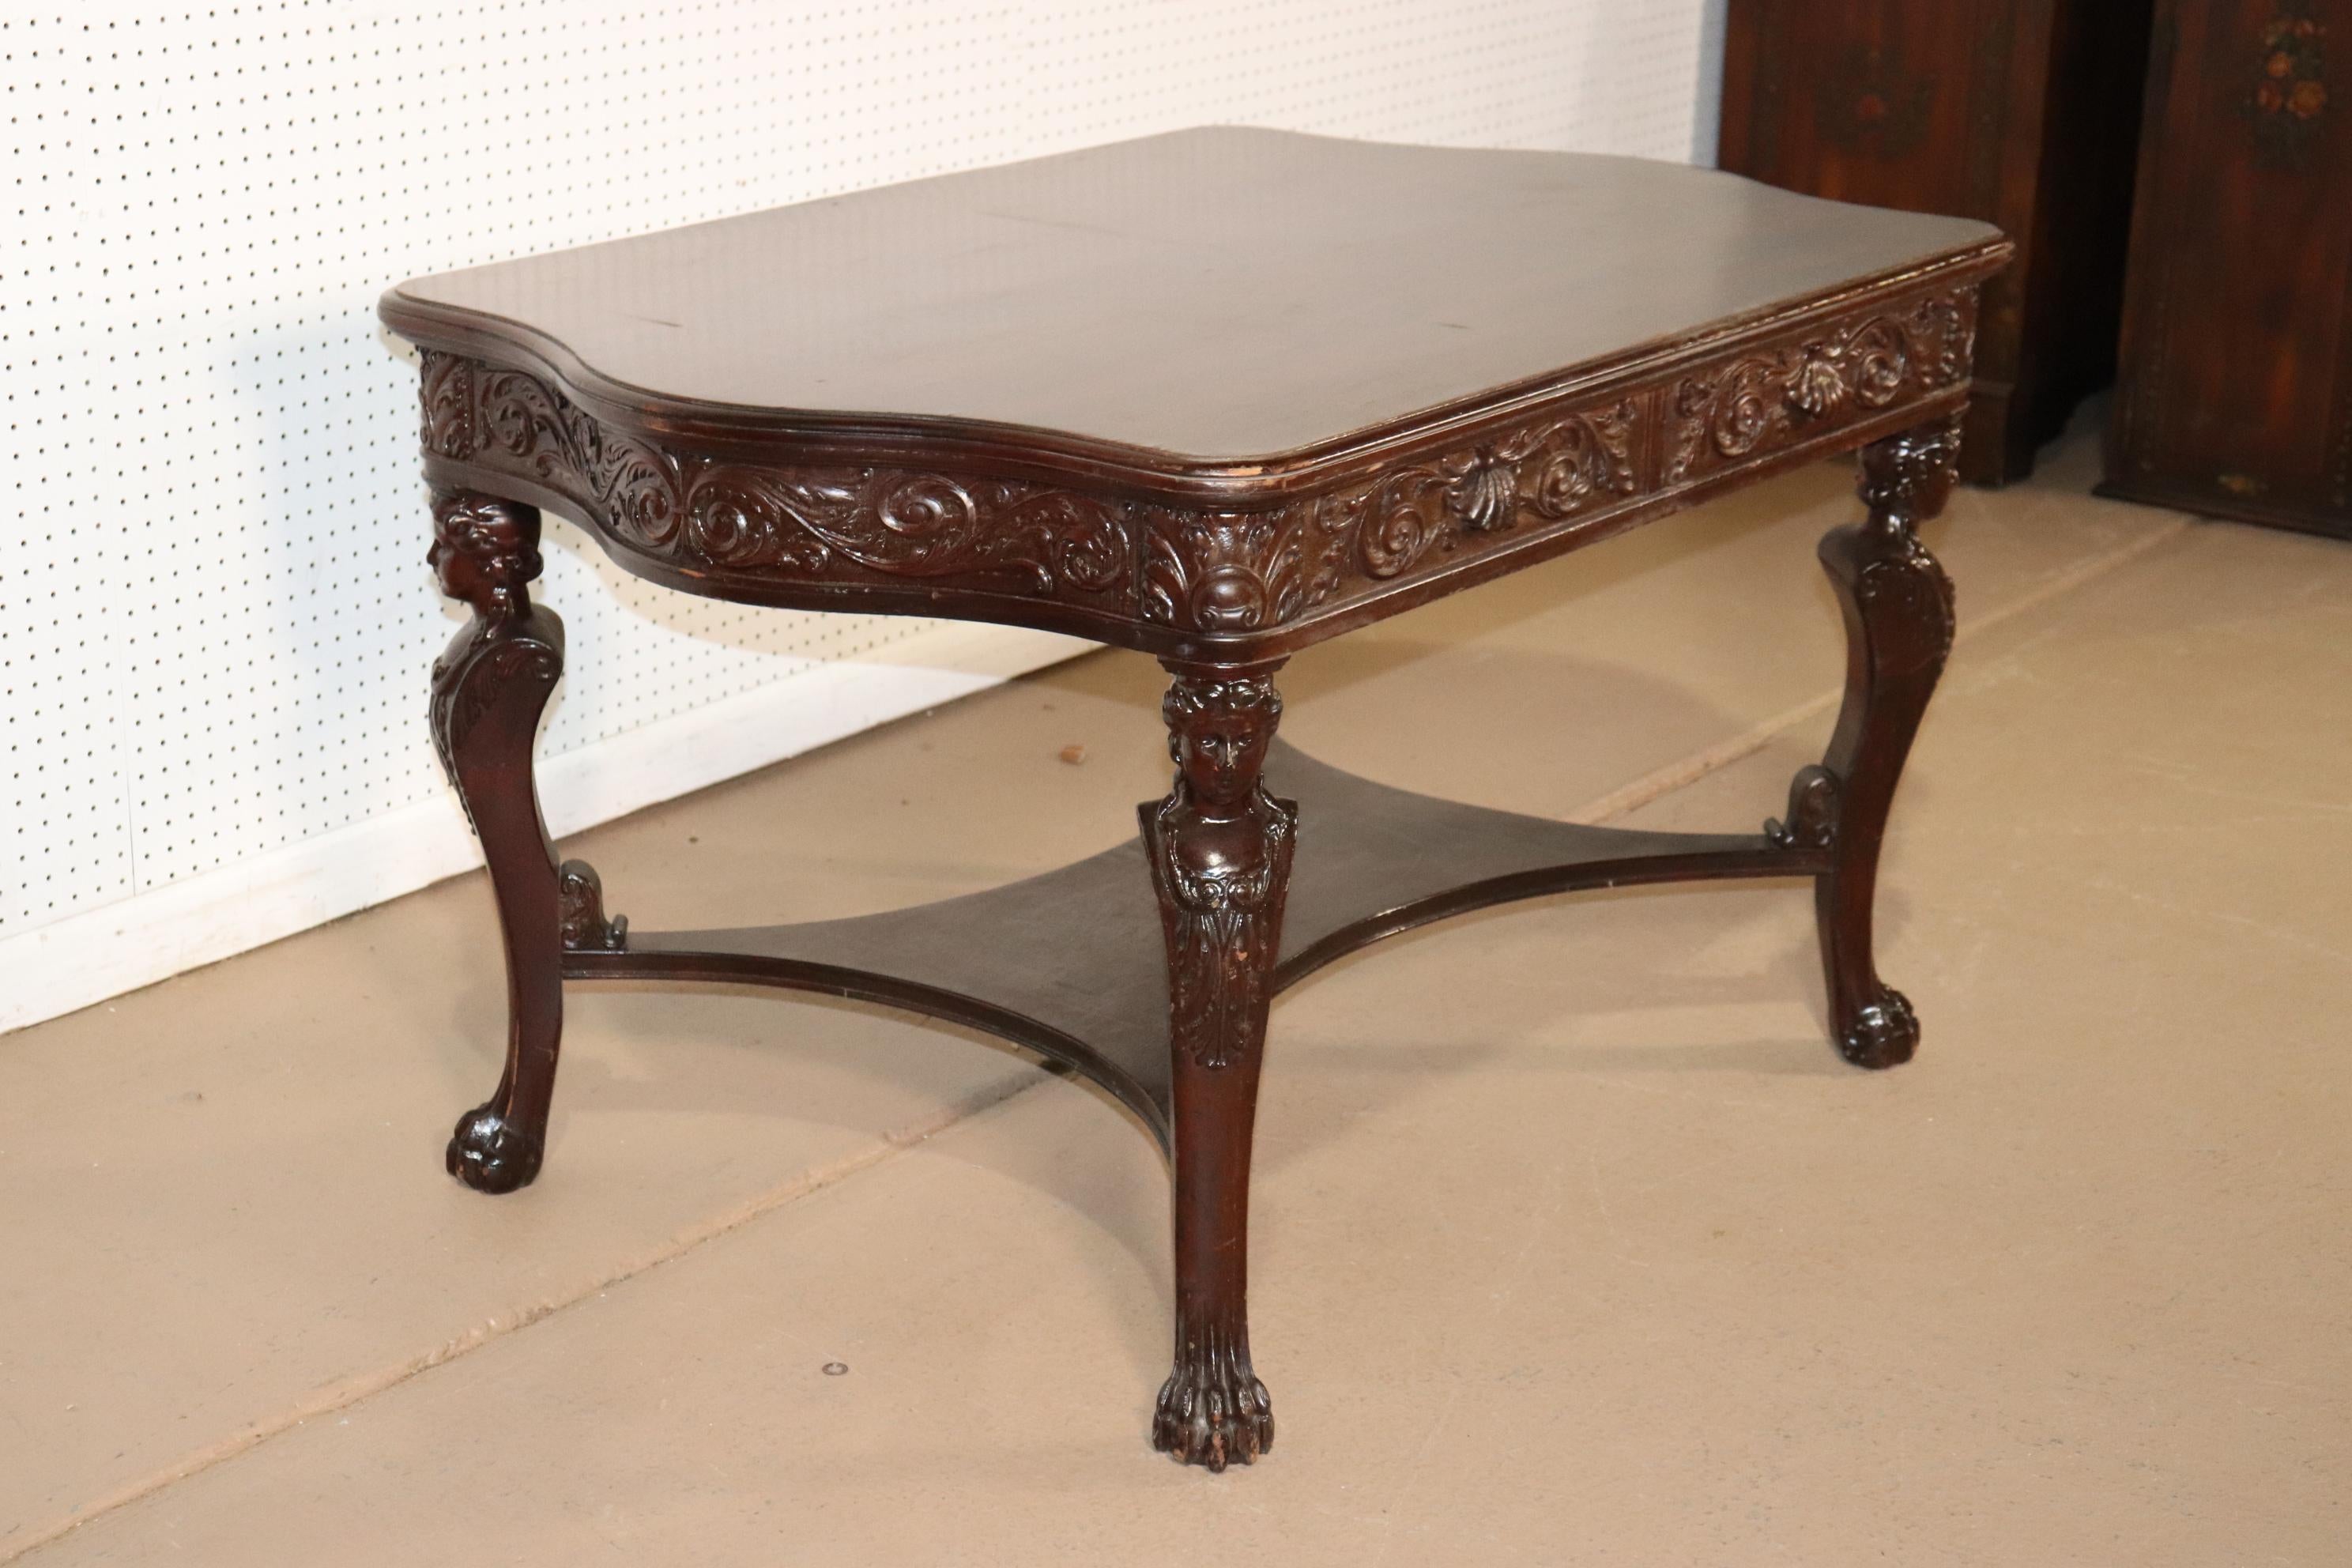 RJ Horner Style Carved Maiden Figural Mahogany Partners Desk Writing Table For Sale 8